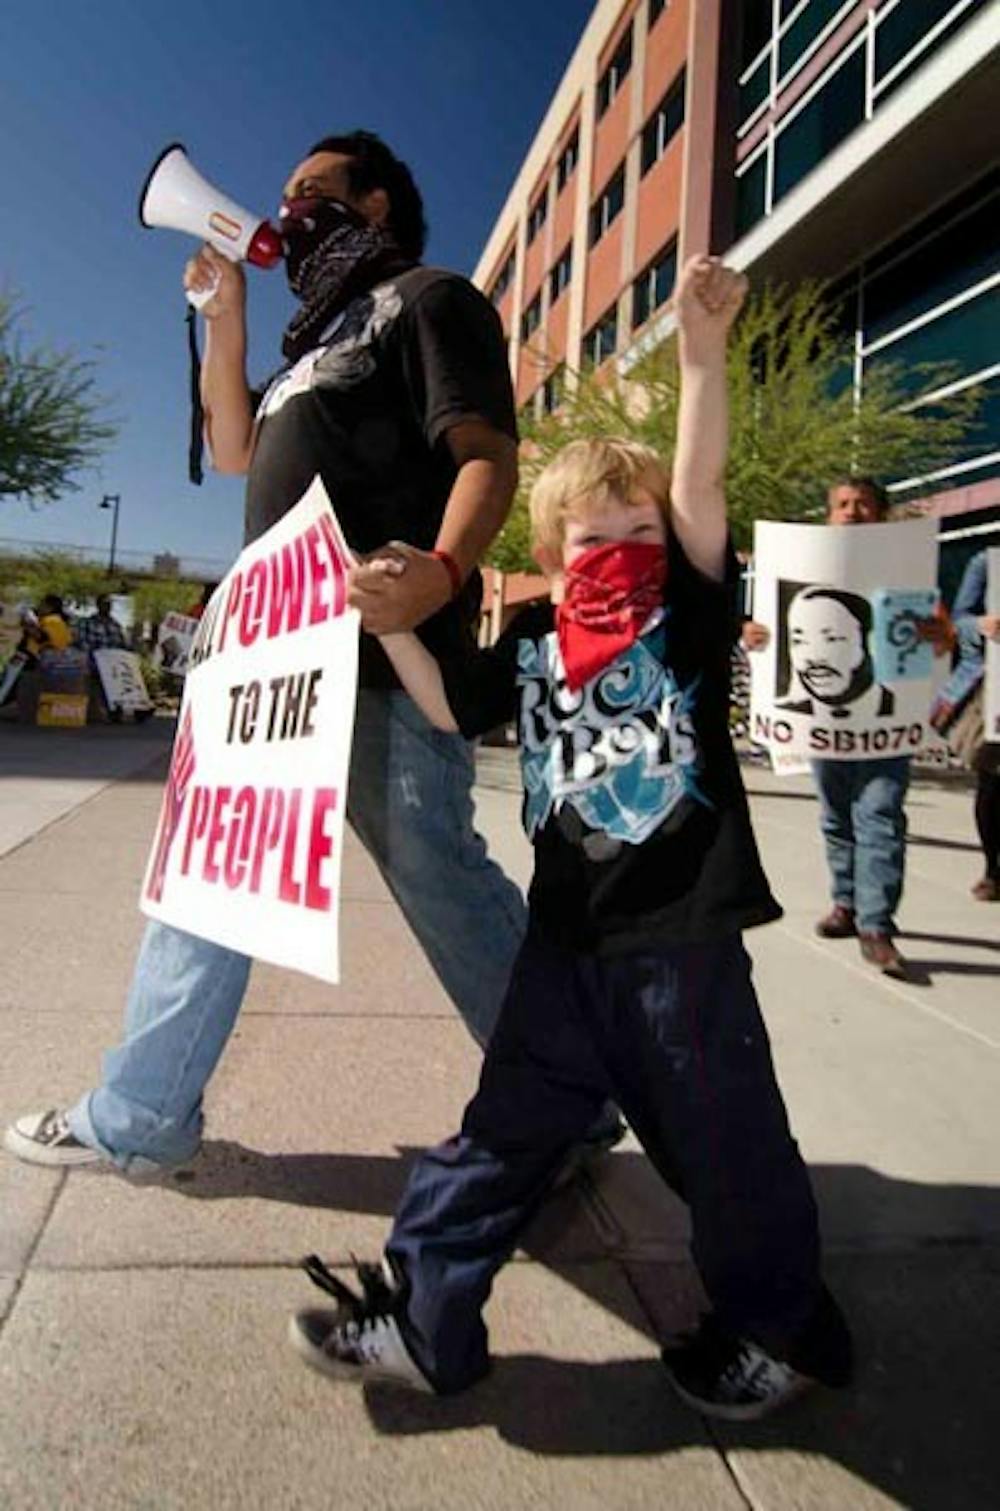 SHOW SUPPORT: Luis Osorio and his son Julian Osorio and many members of Puente, a local immigration rights organization, showed their support outside the Maricopa County Court House Tuesday for those that were arrested Jul. 29 for civil disobedience against SB 1070. (Photo by Aaron Lavinsky)